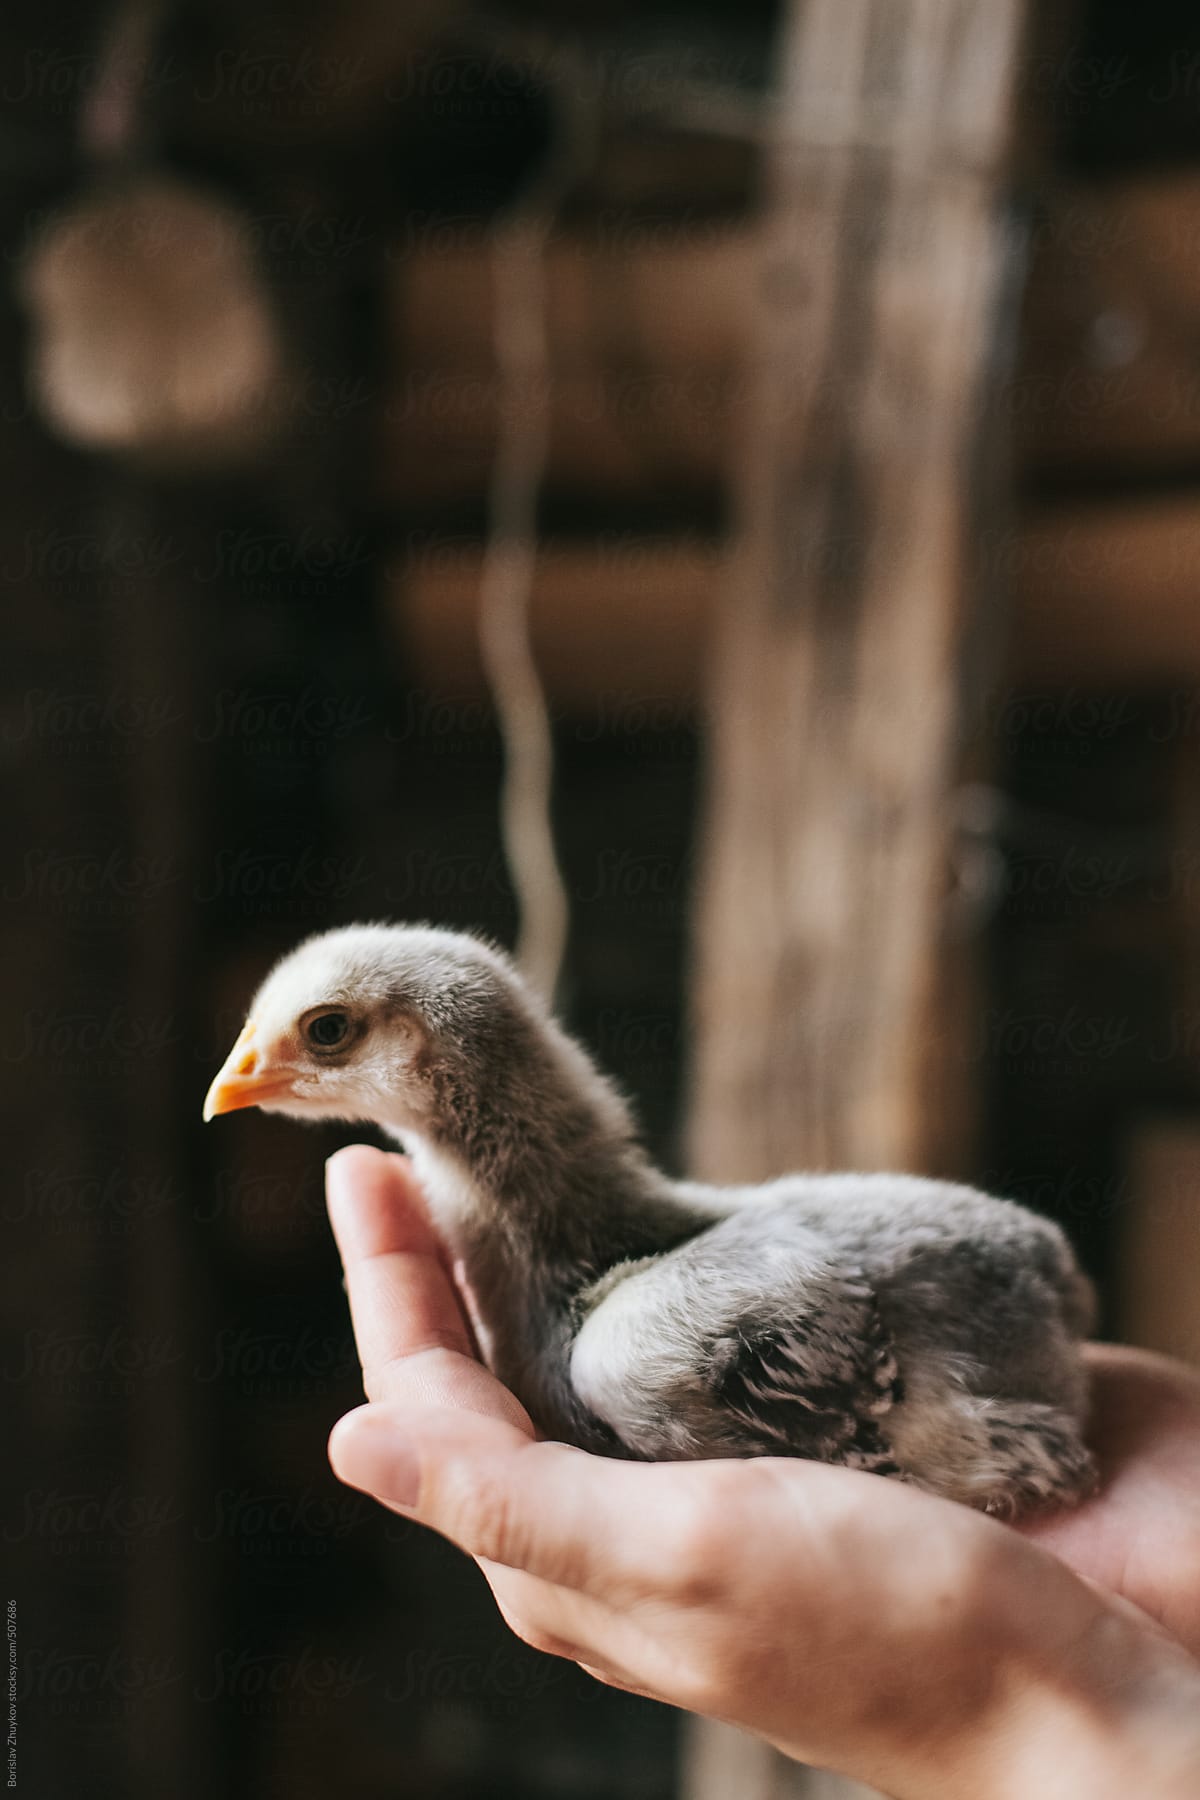 Hands carefully holding a baby chicken